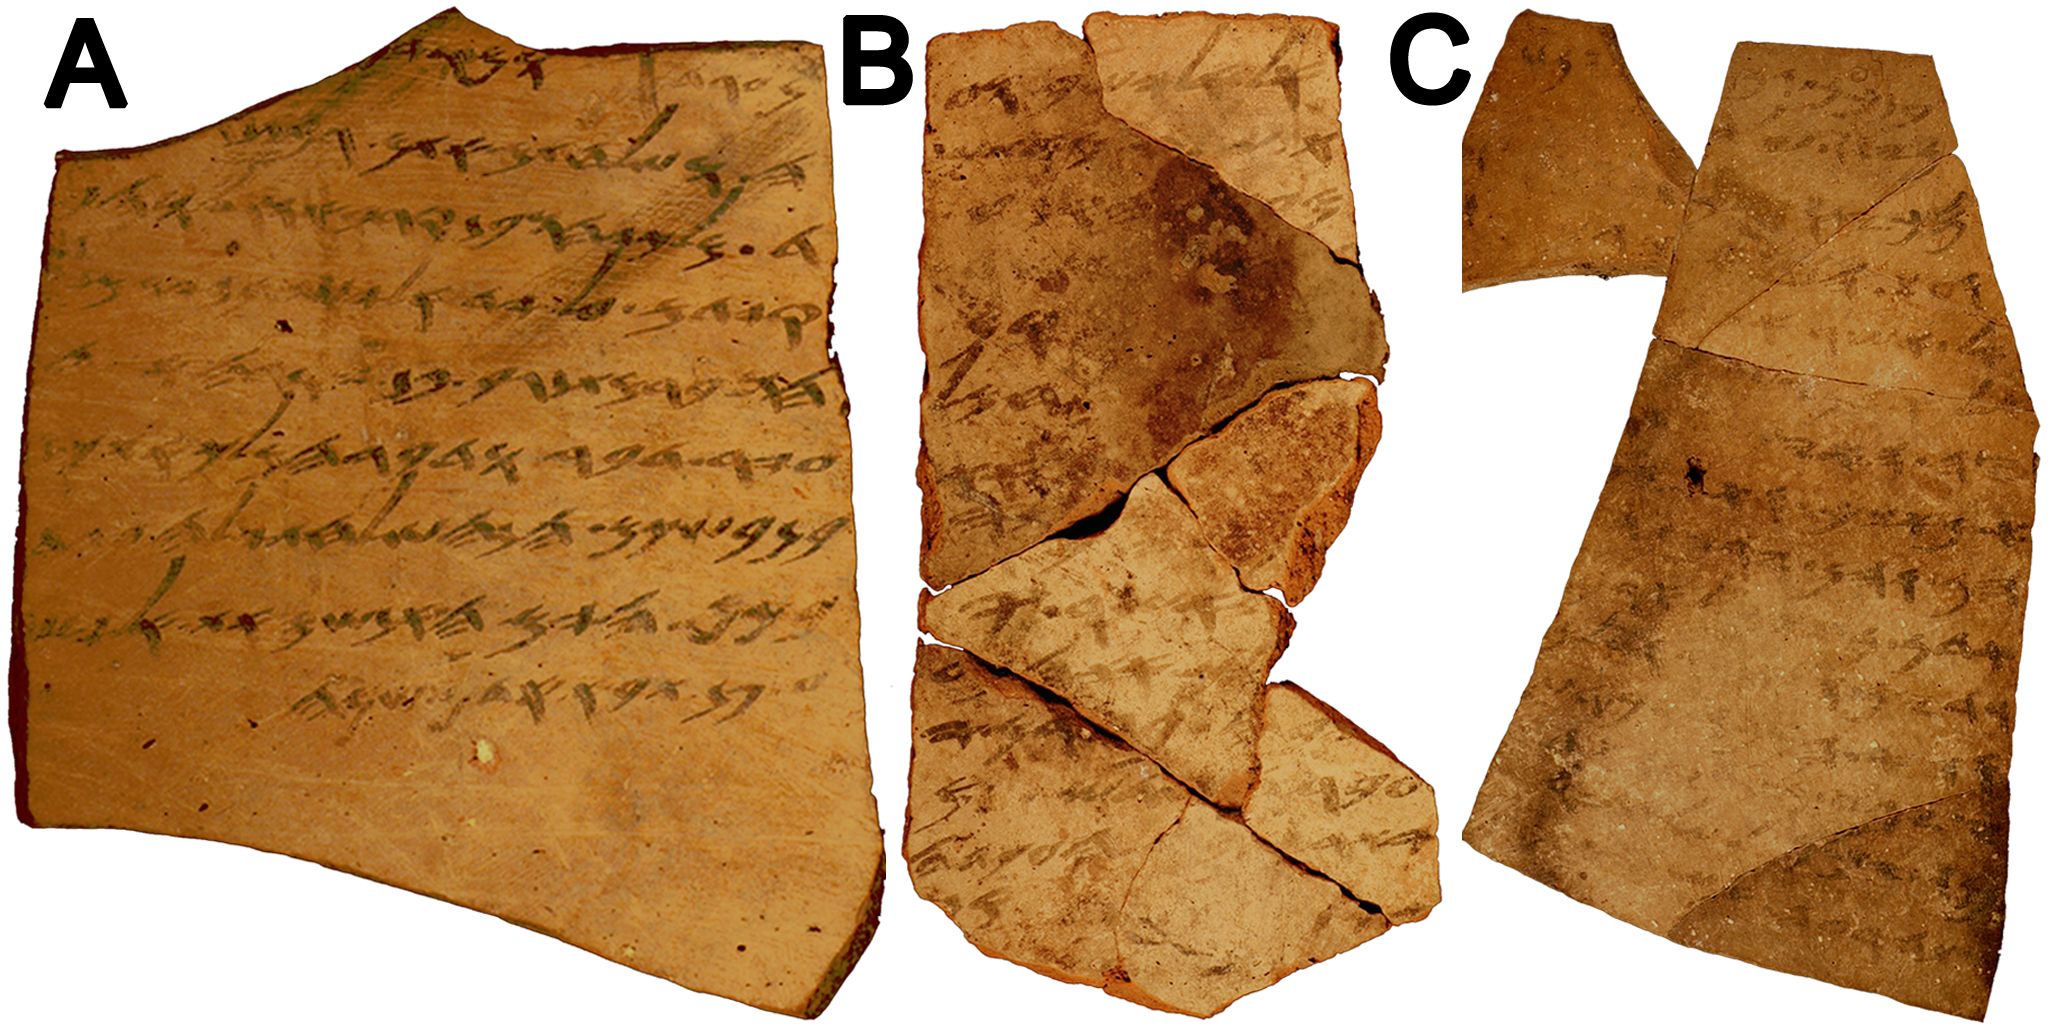 Pioneering DNA study reveals not all Dead Sea Scrolls are from Dead Sea